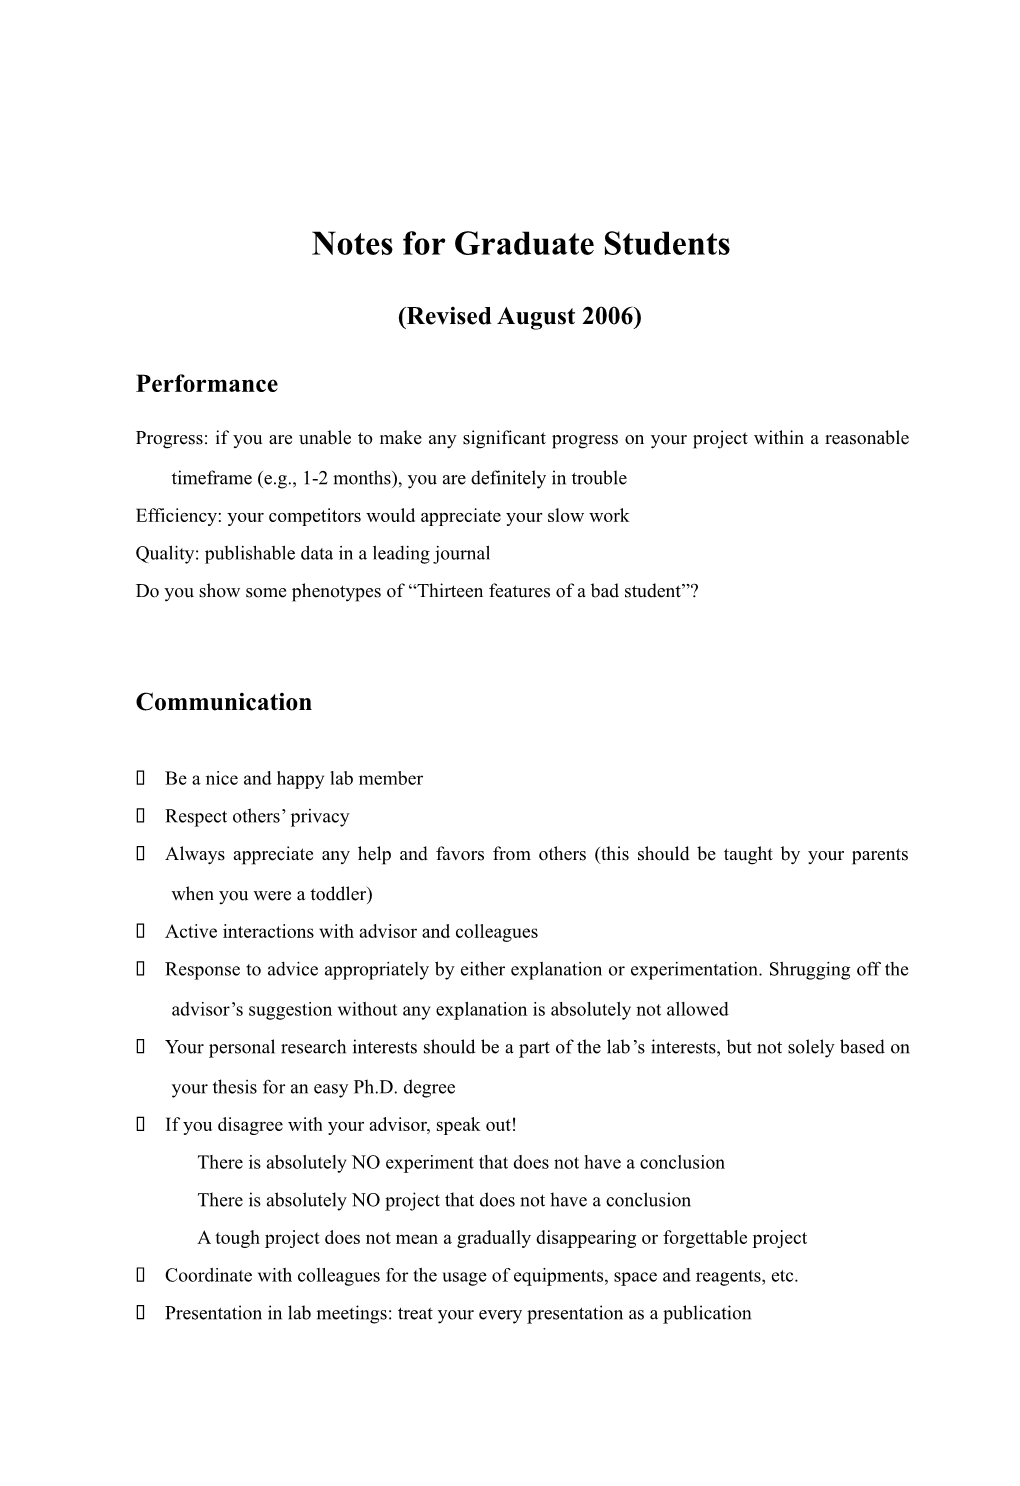 Notes for Graduate Students